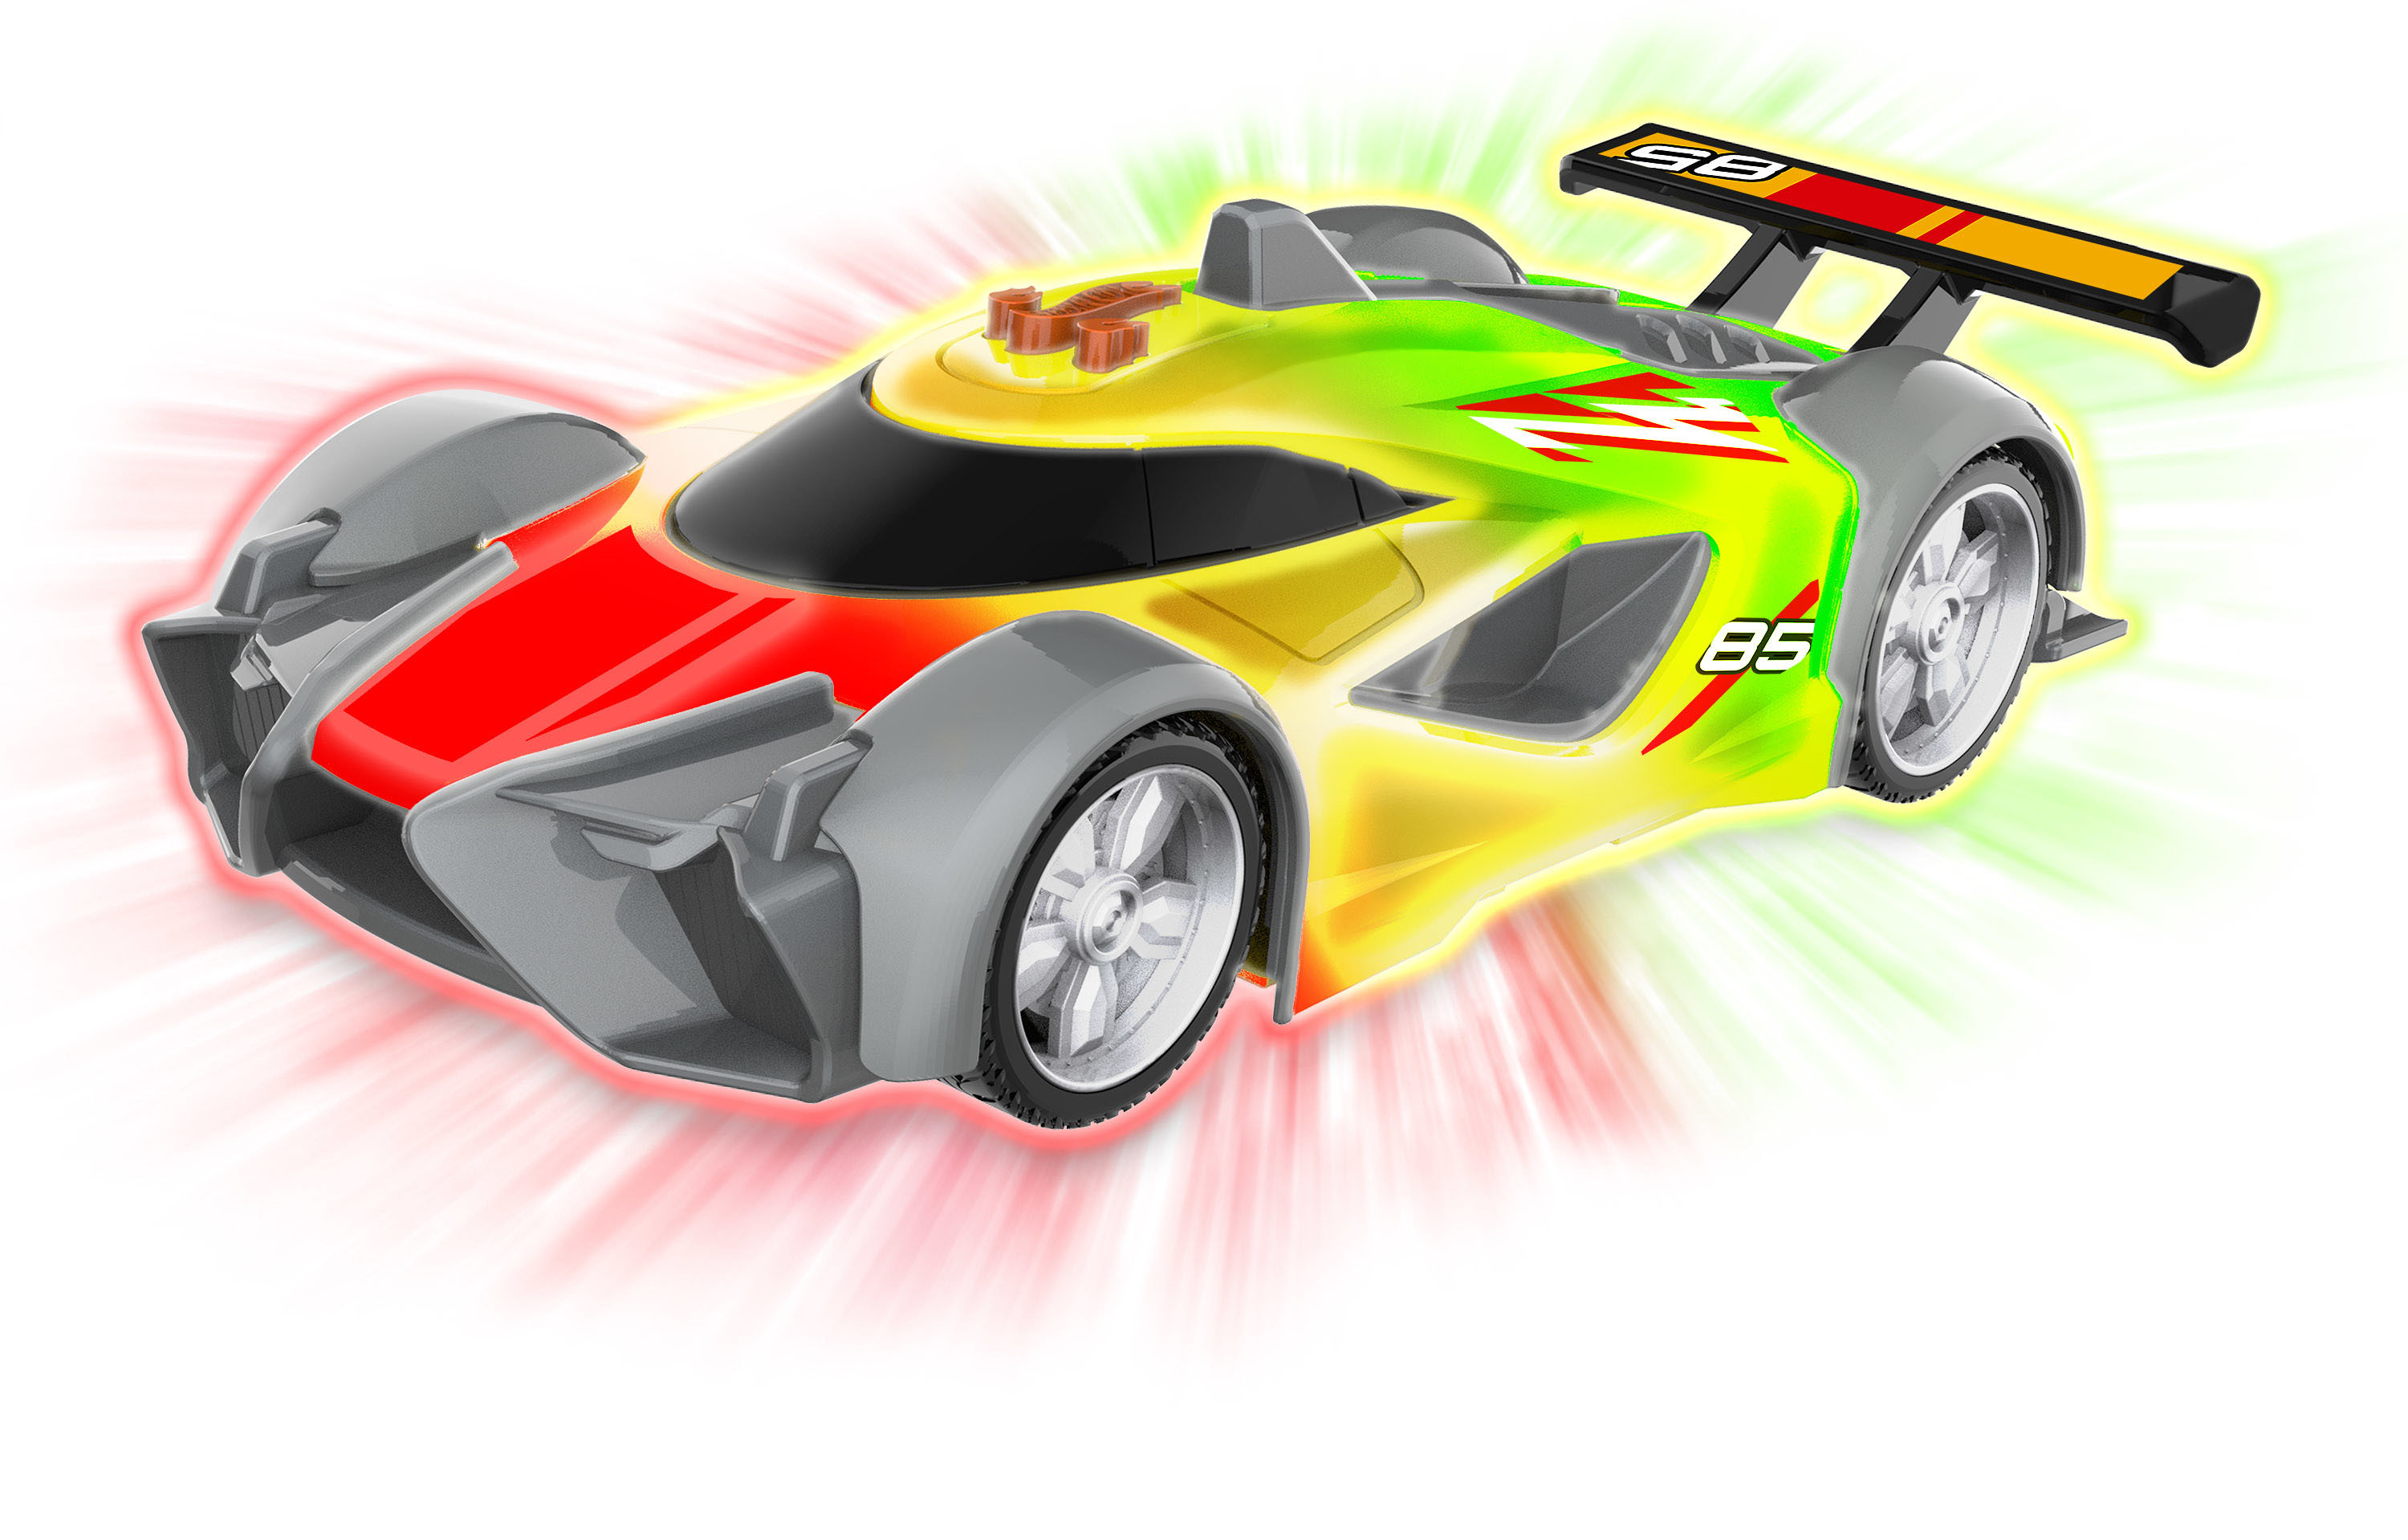 Best Buy: Hot Wheels Color Crashers Styles May Vary 98000